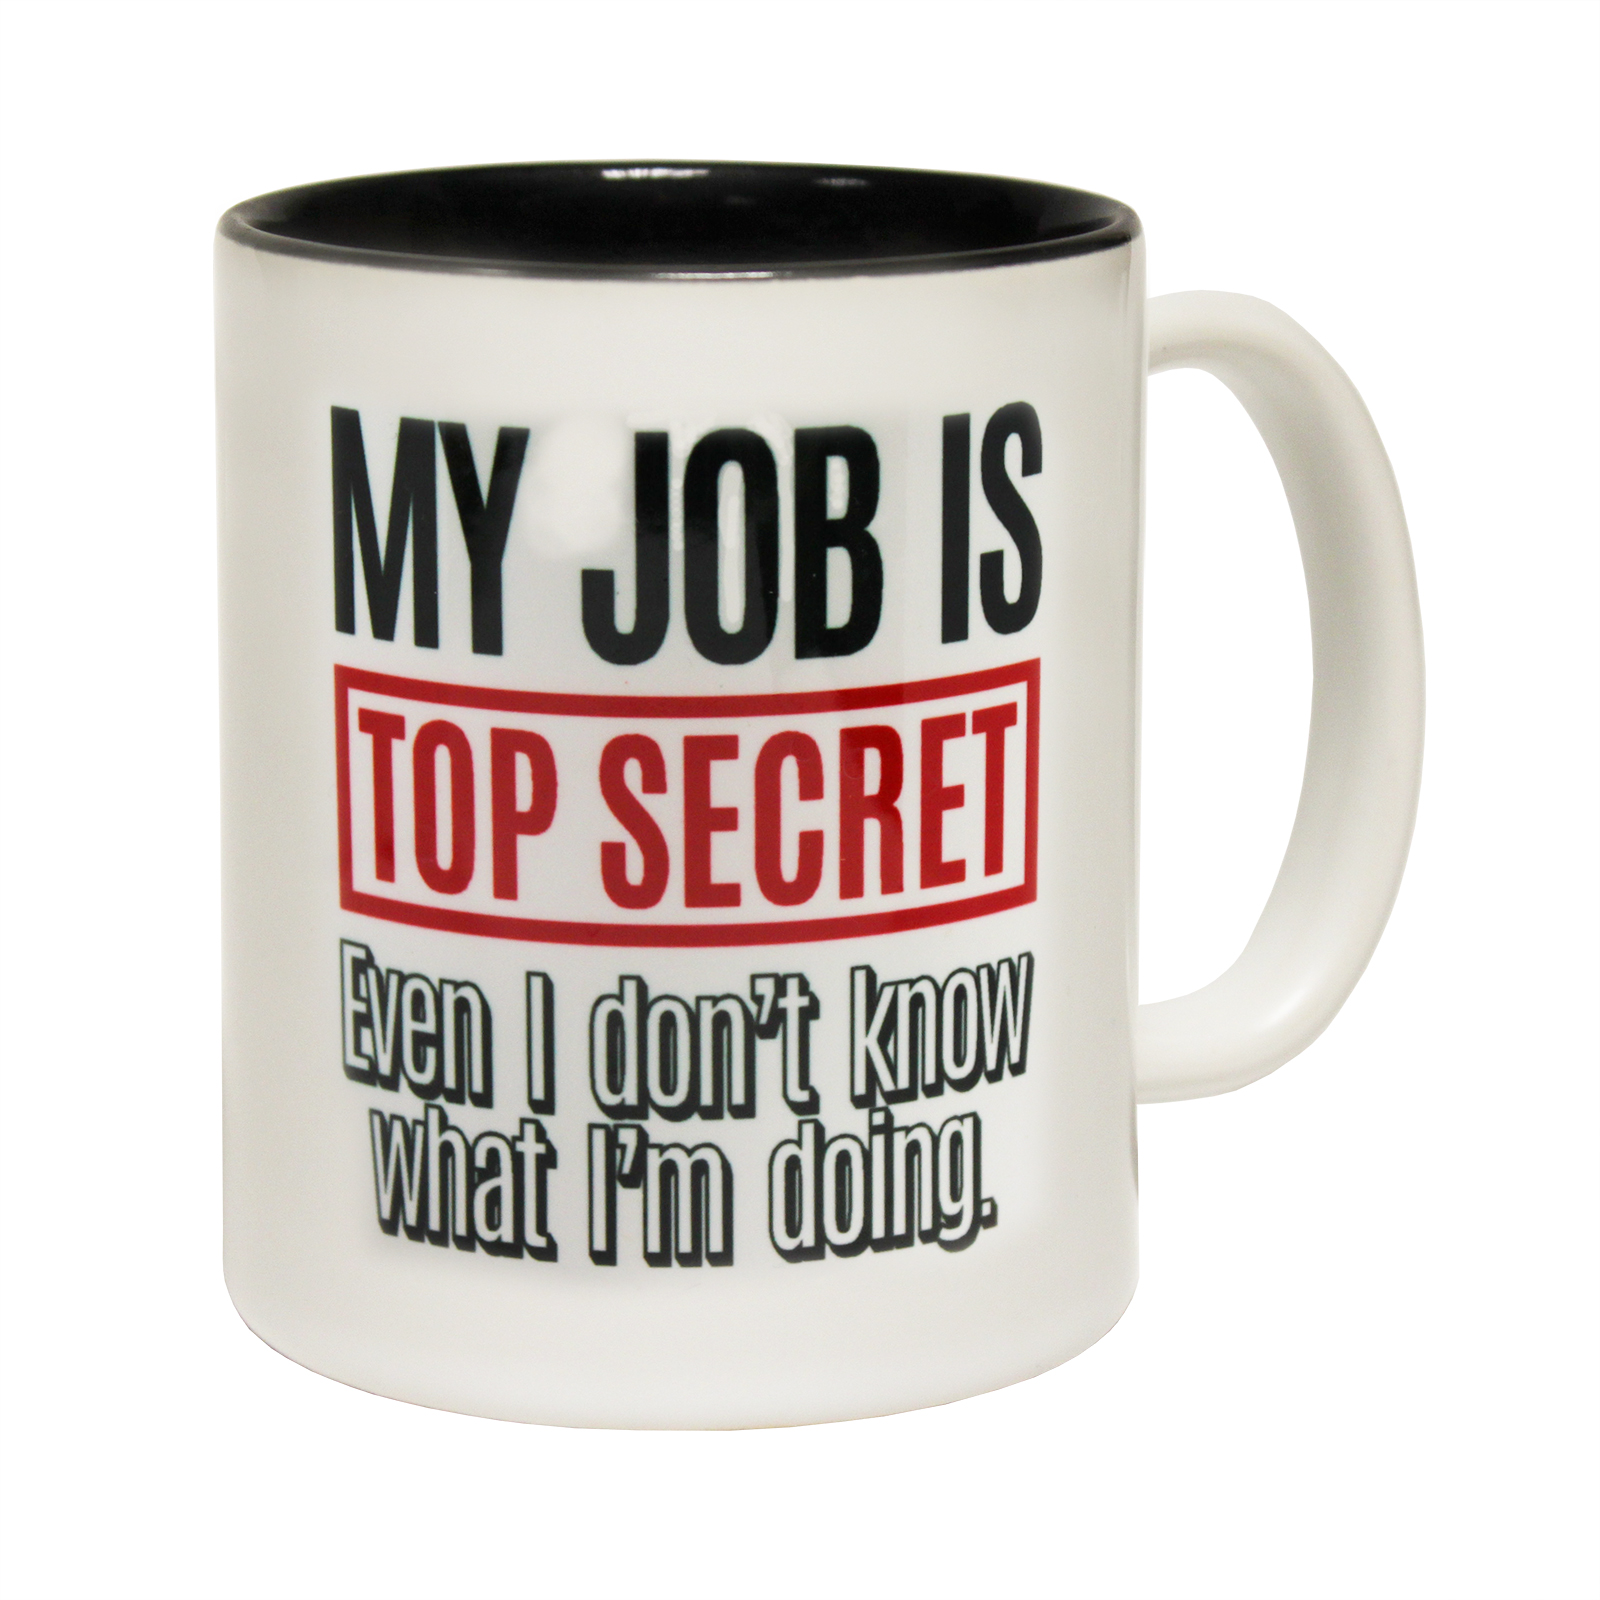 My Job Is Top Secret Mug Funny Tea Coffee Comedy Cup Kitchen Home Office Gift 